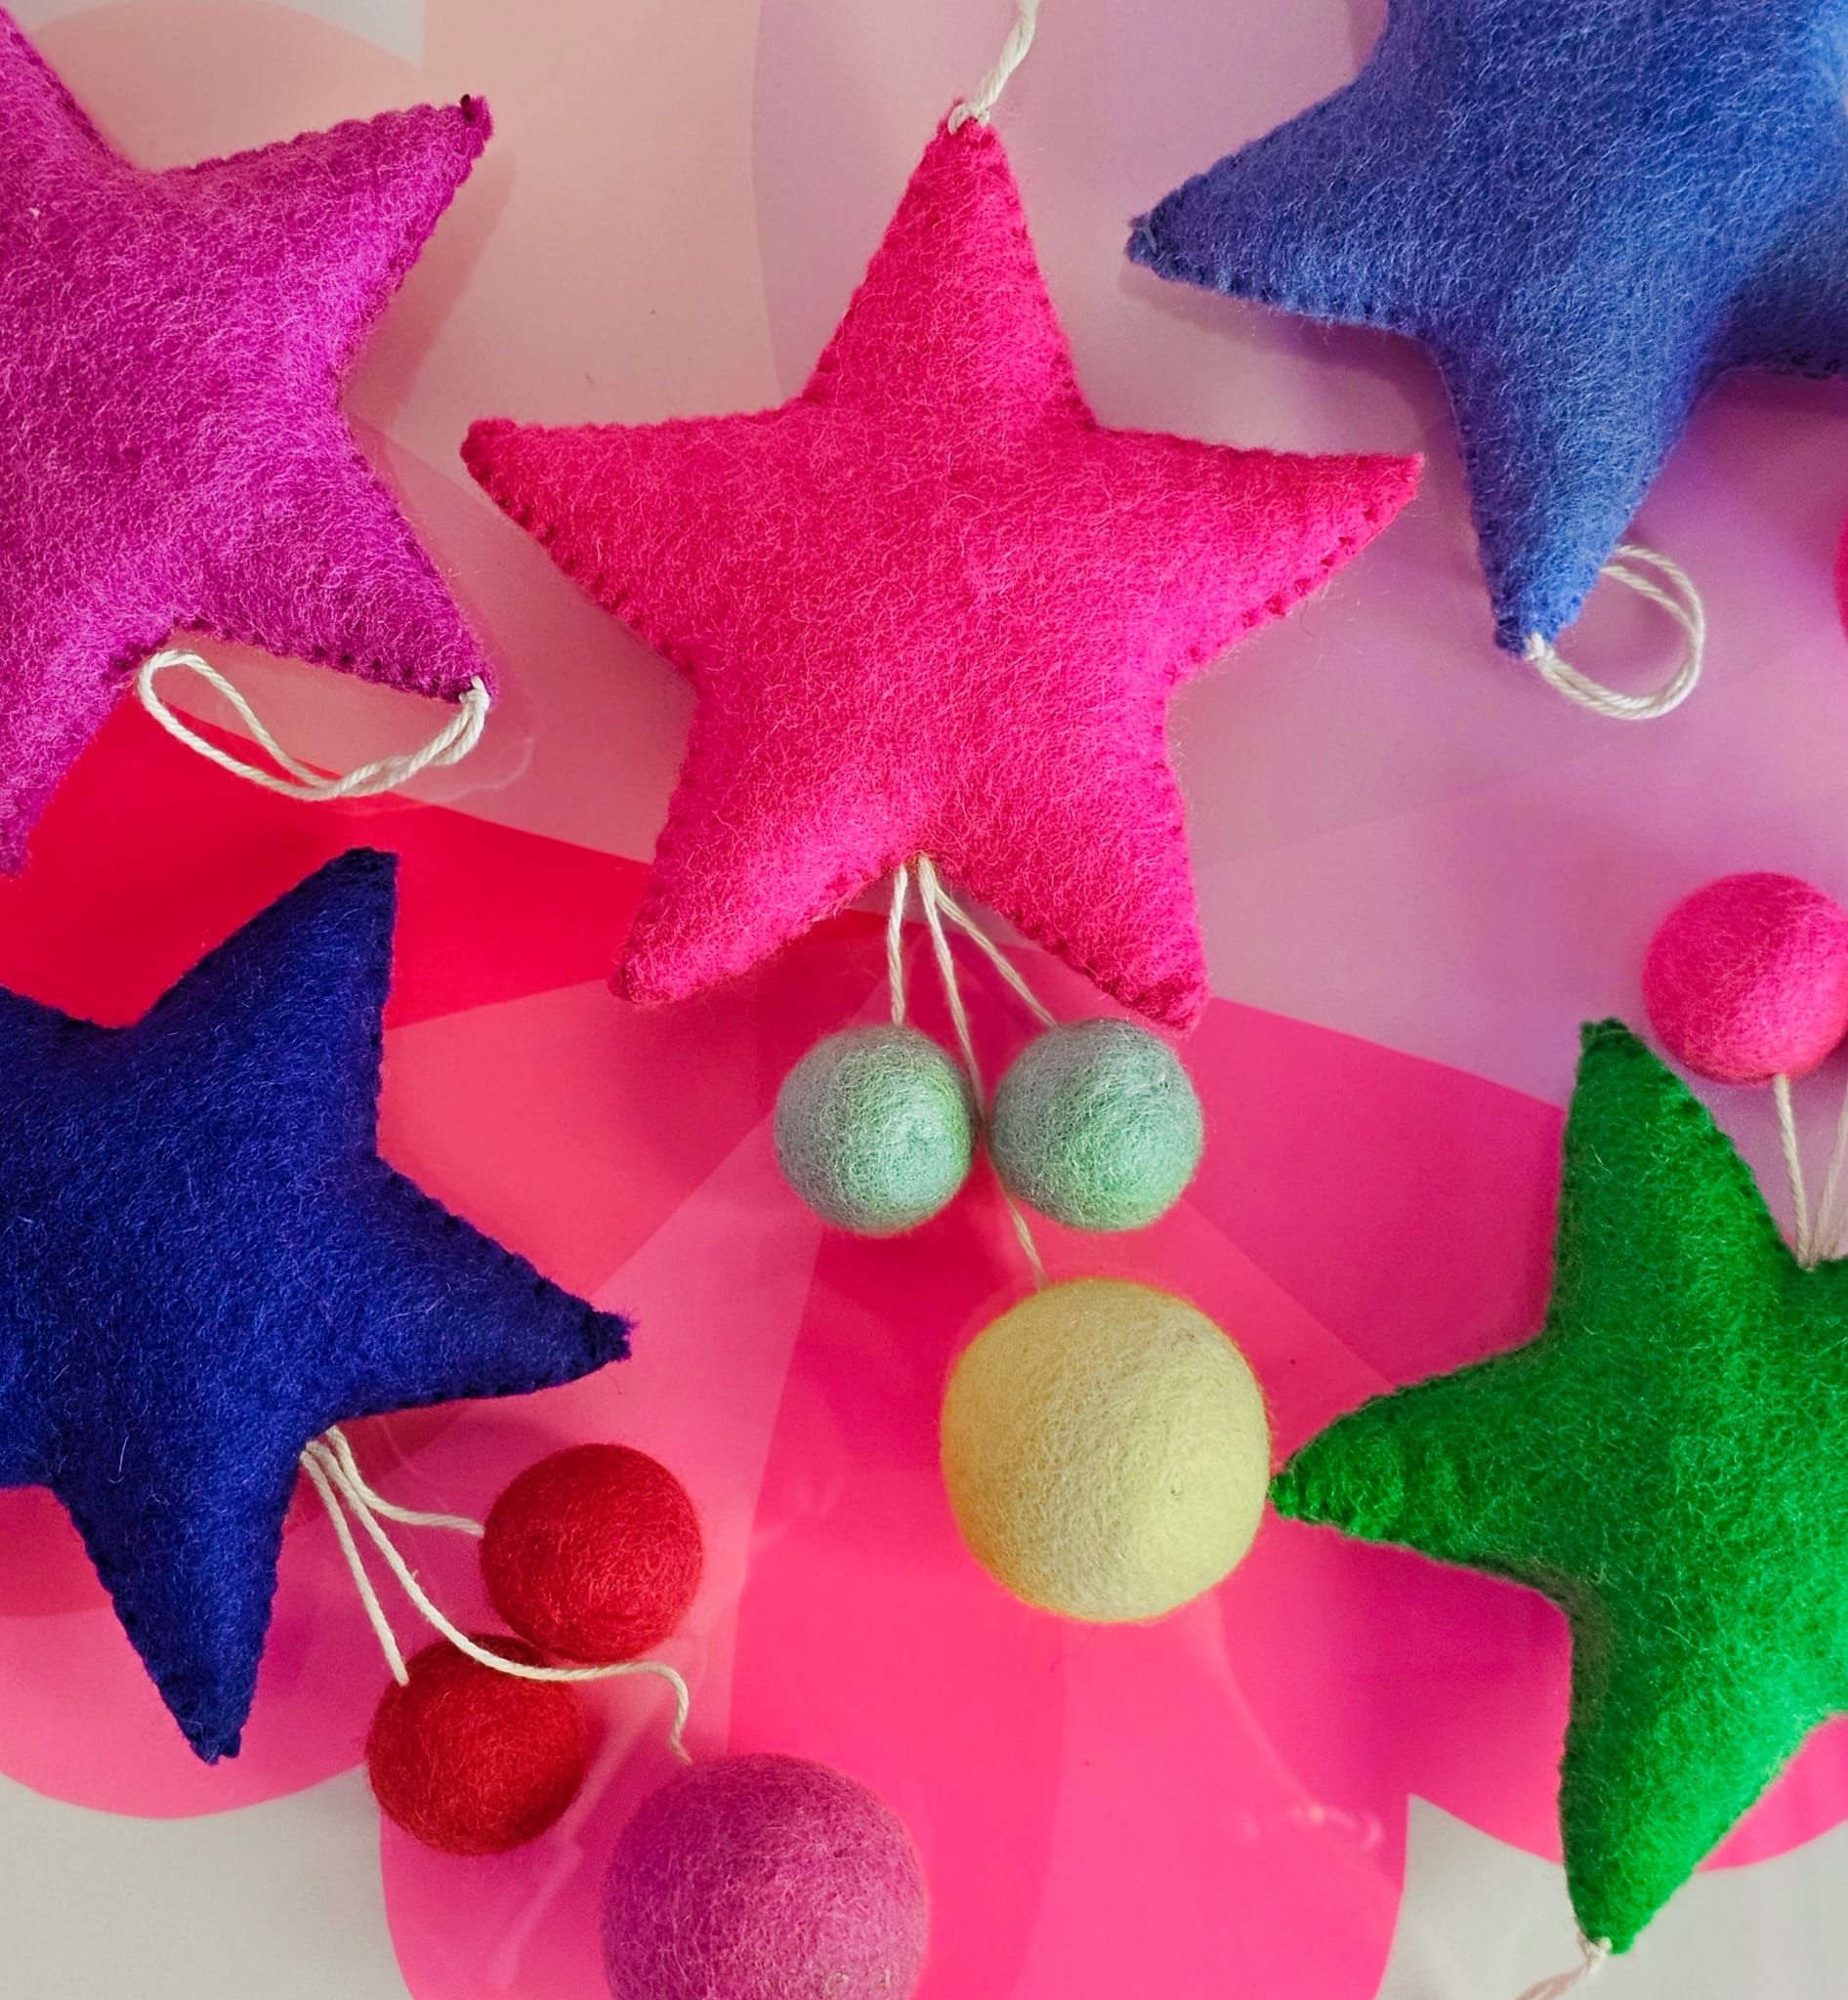 Coral star with Lilac and mint balls-Fun-Little Fish Co.